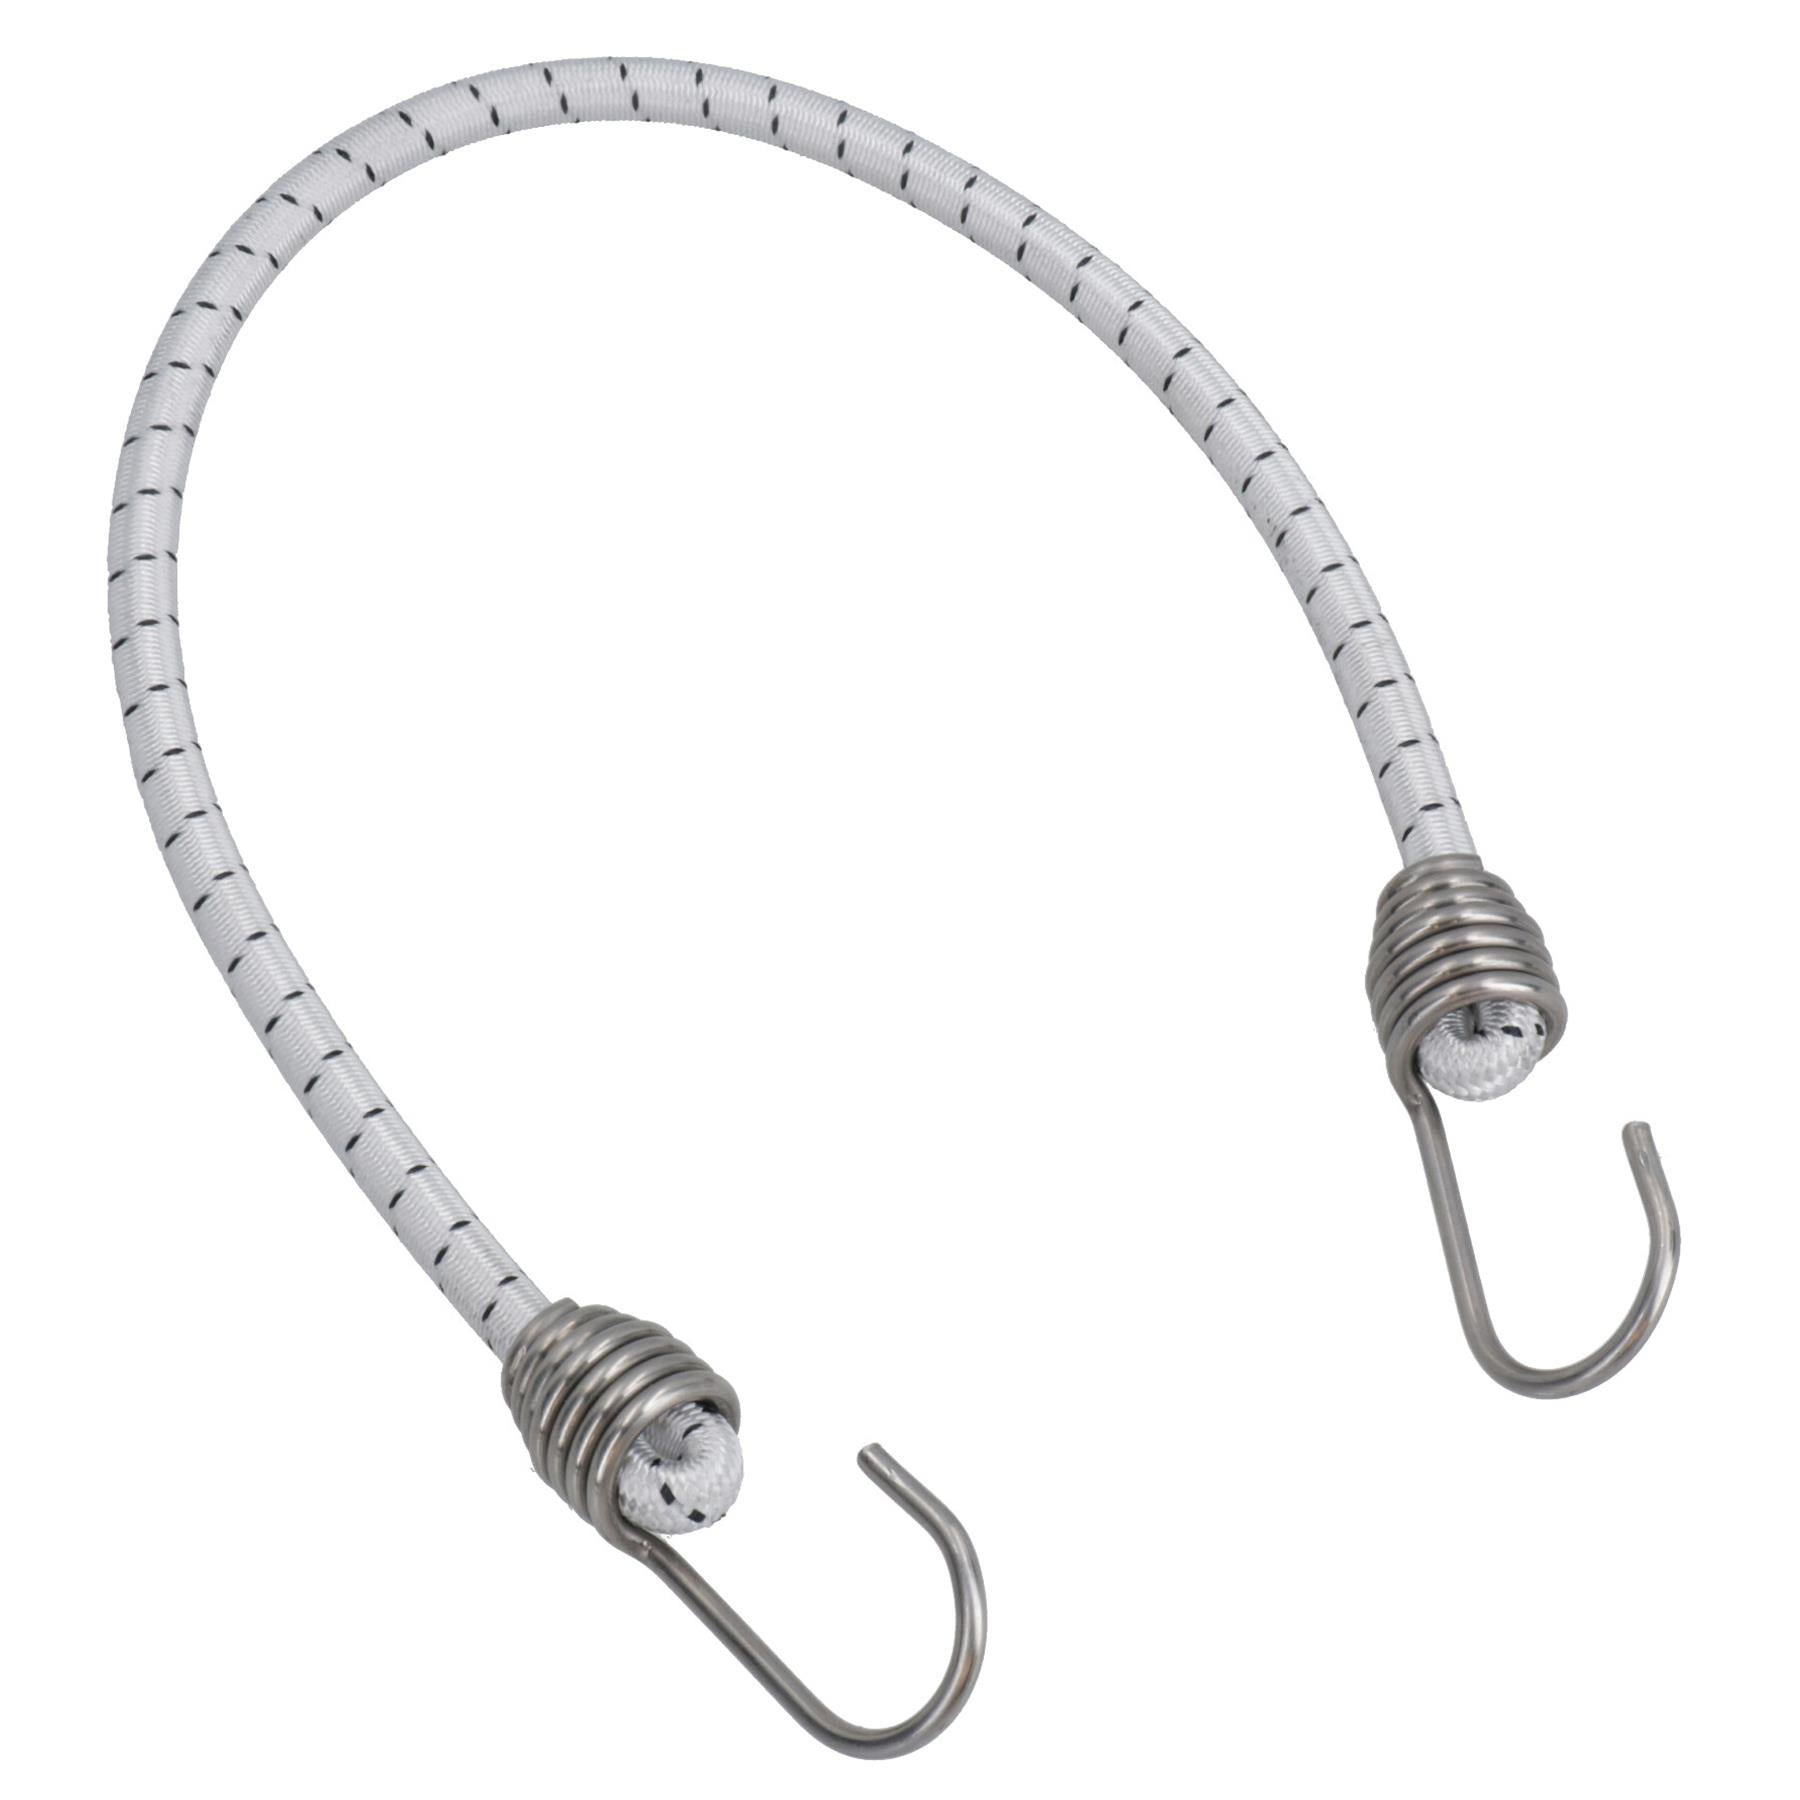 30" Bungee Rope With Stainless Steel Hooks Cords Shock Elastic Marine Boat